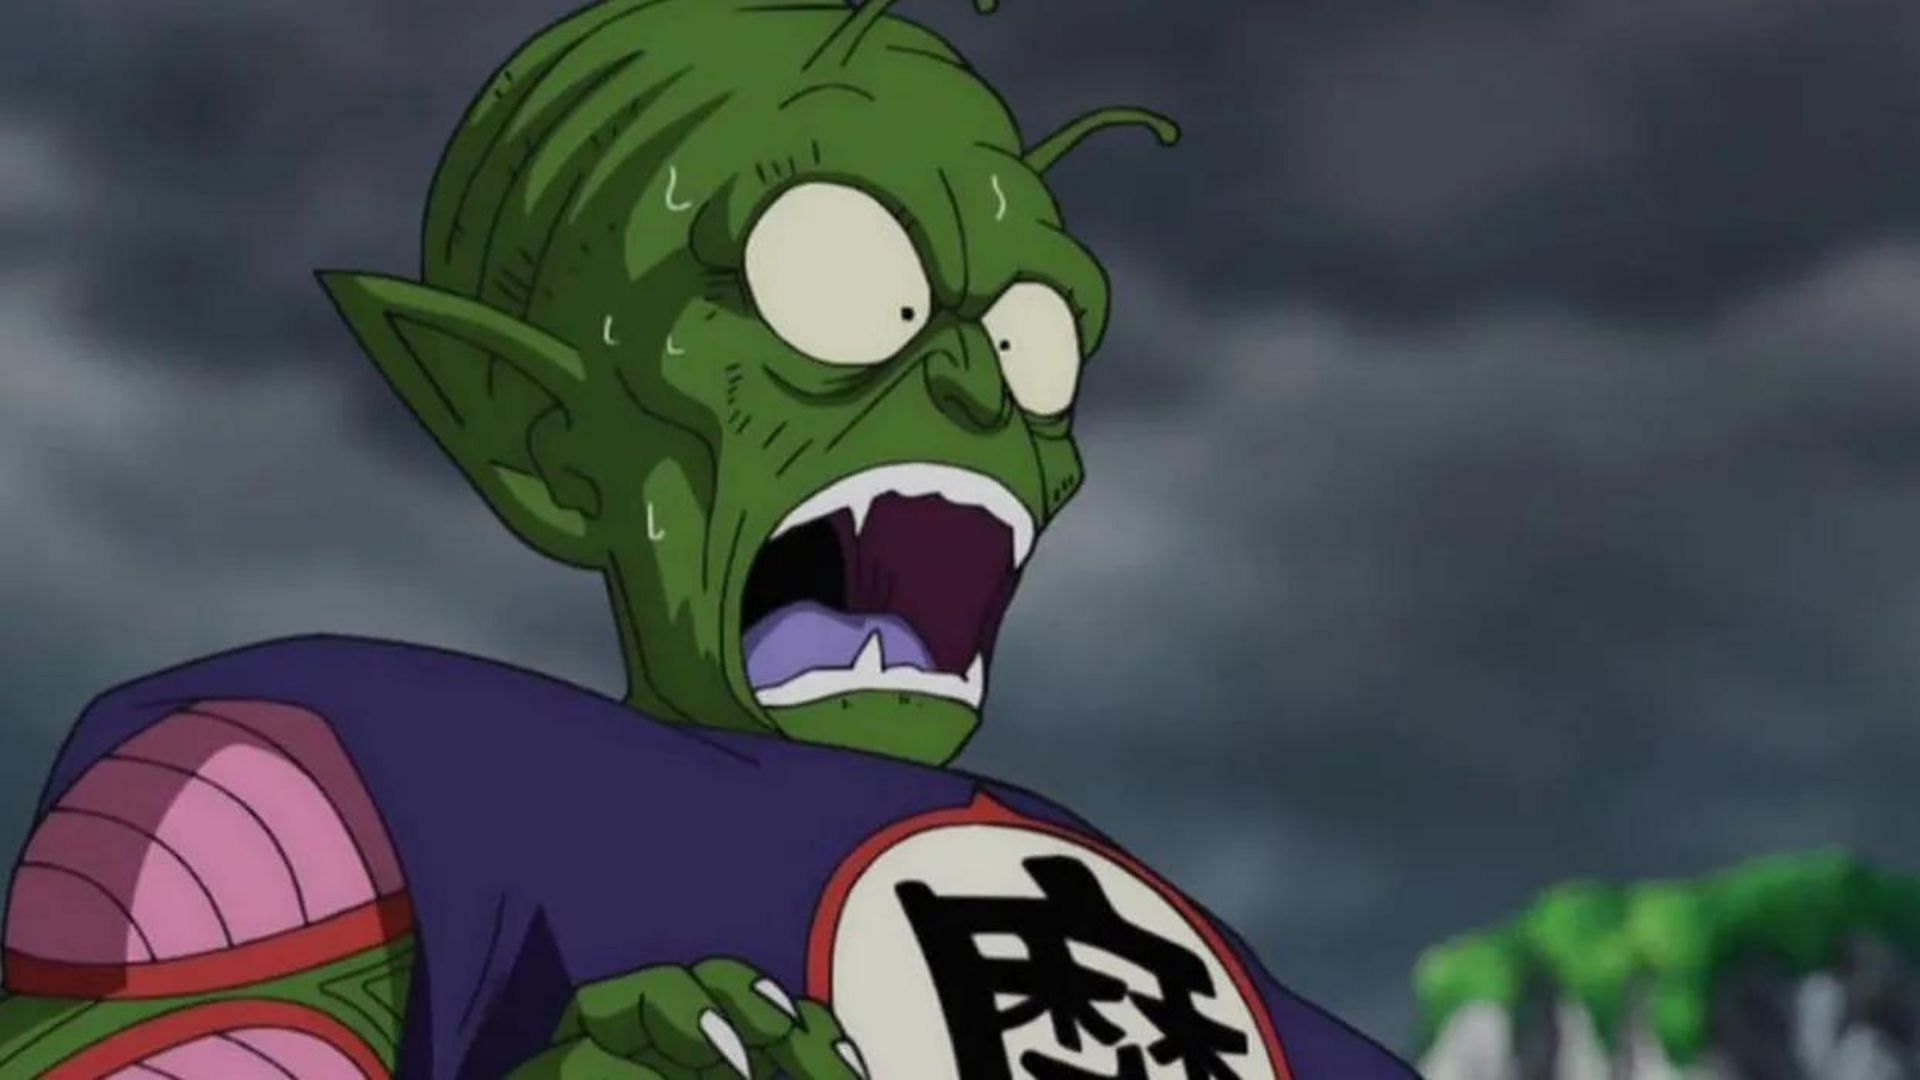 King Piccolo as seen in the anime (Image via Toei Animation)